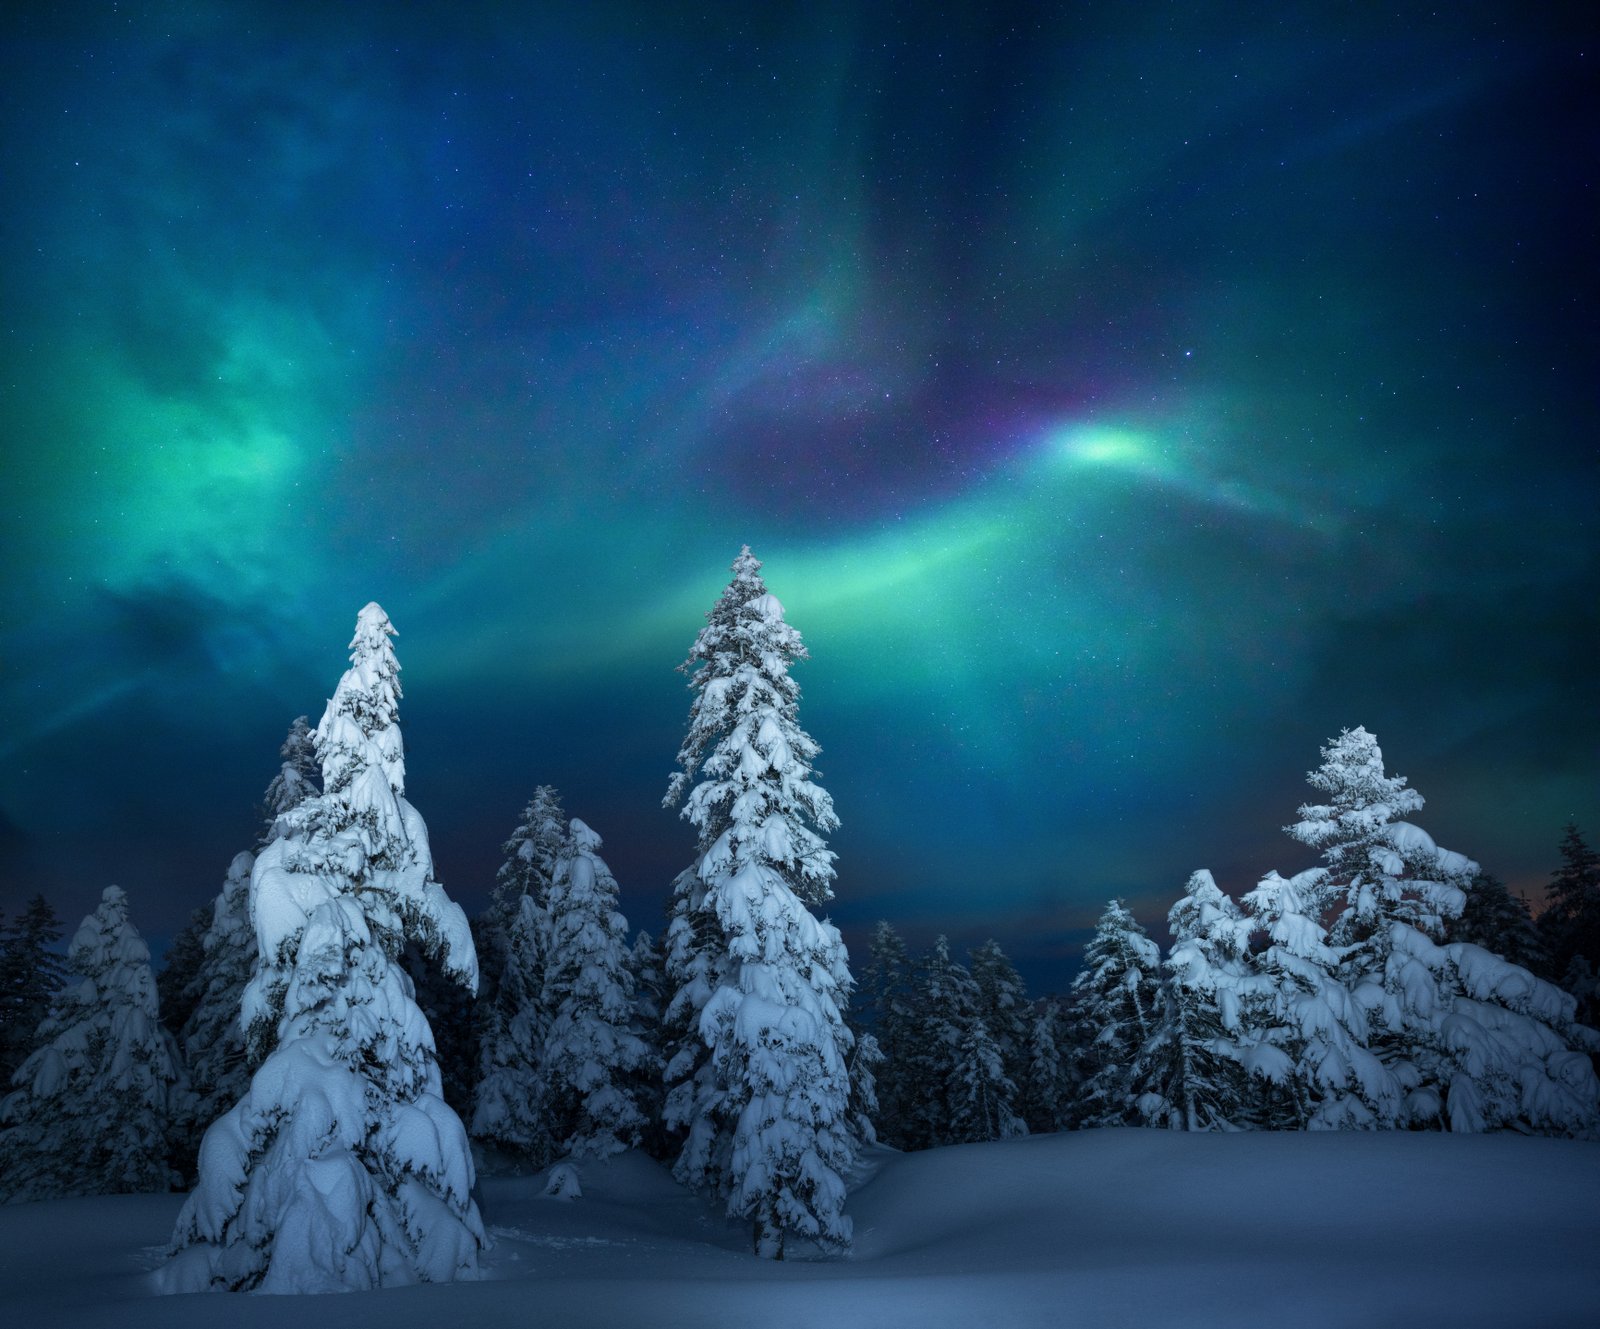 Snow covered trees with the northern lights in the sky behind them